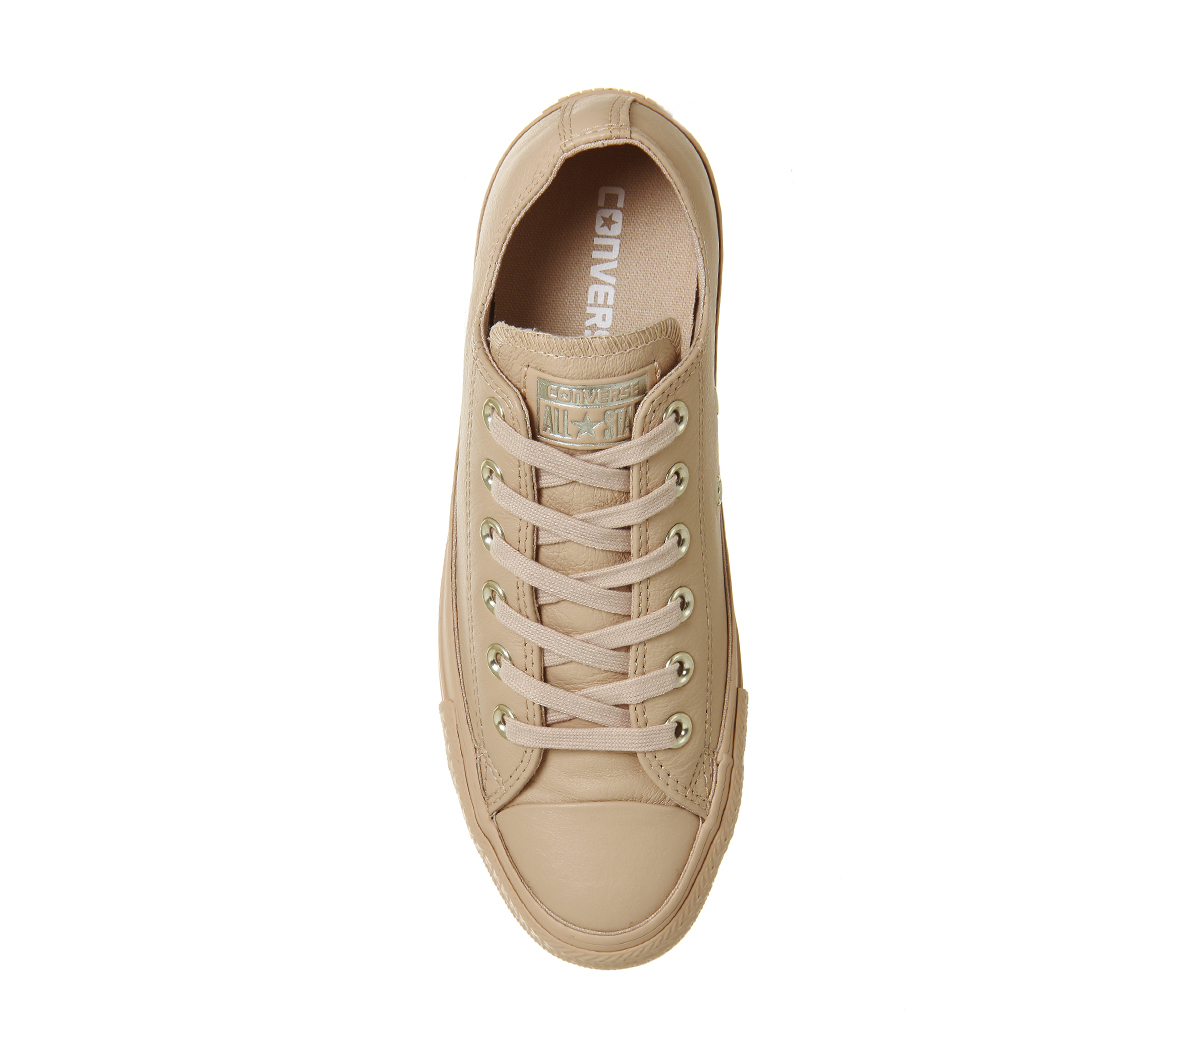 Converse All star Low Leather Trainers Amberlight Light Gold - Hers trainers